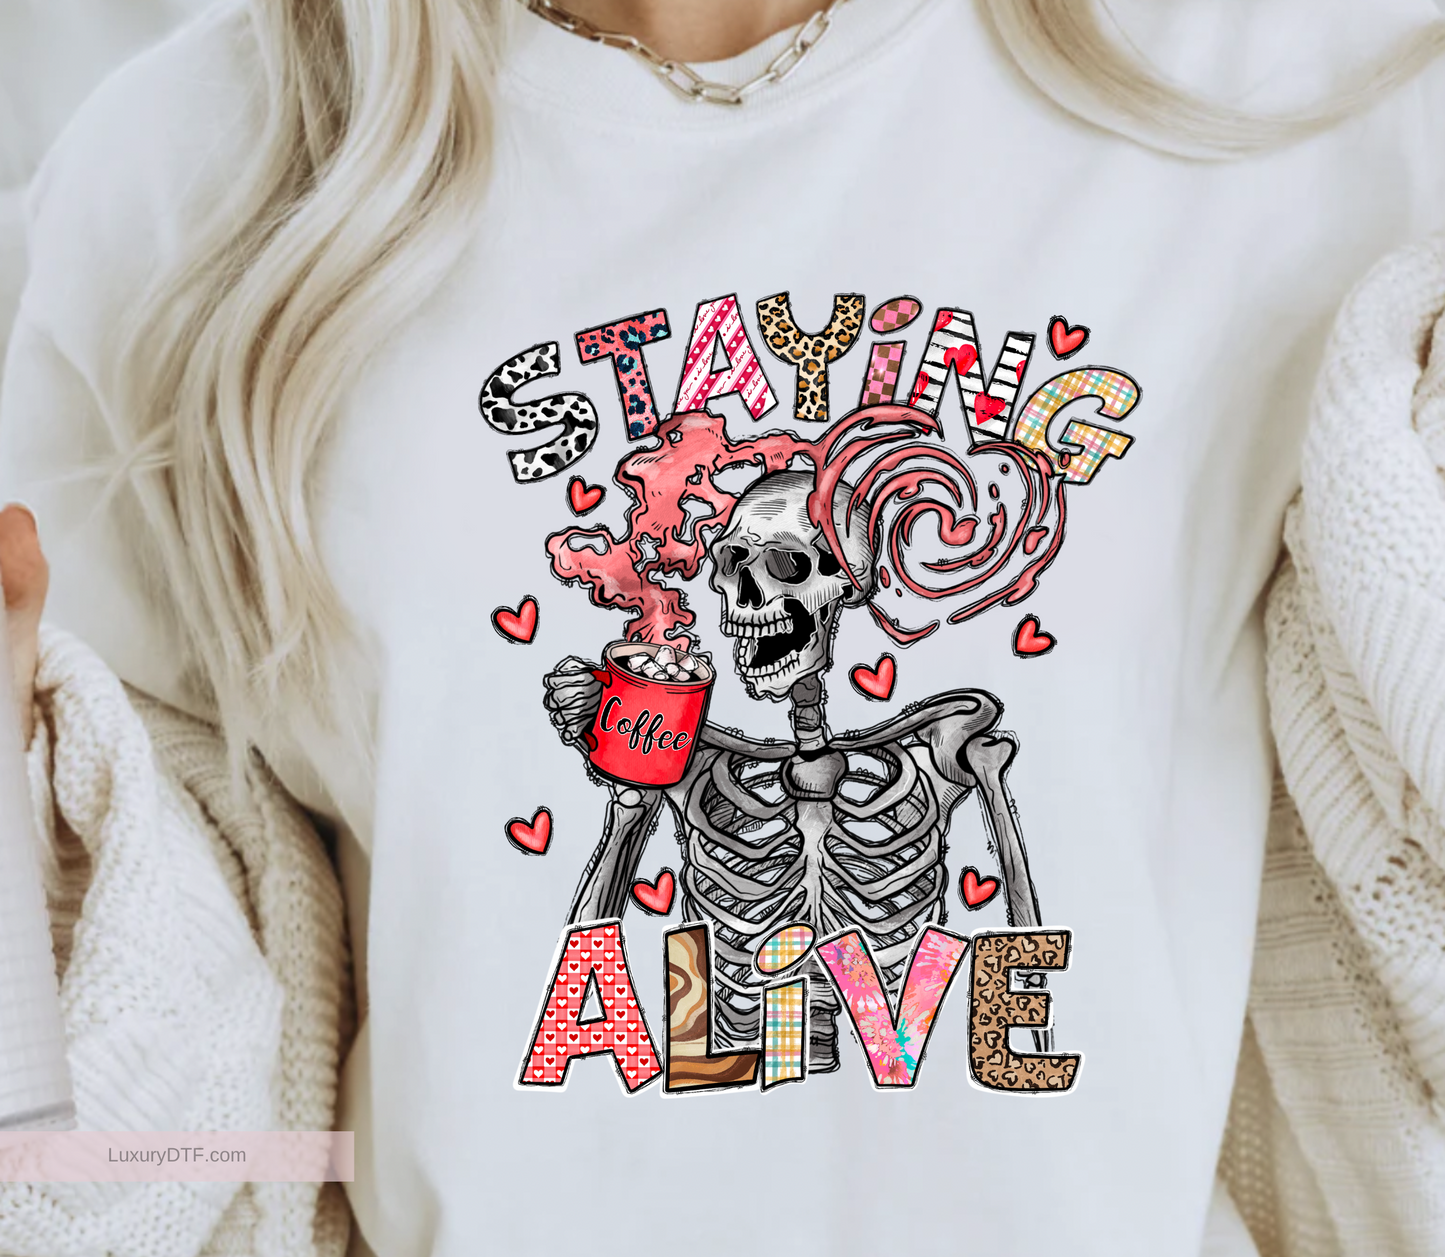 Funny illustration skeleton design with colorful text "Staying Alive" drinking his/her favorite coffee, with vapor in a shape of heart. DTF transfer ready to press, screen print transfer | Luxurydtf.com